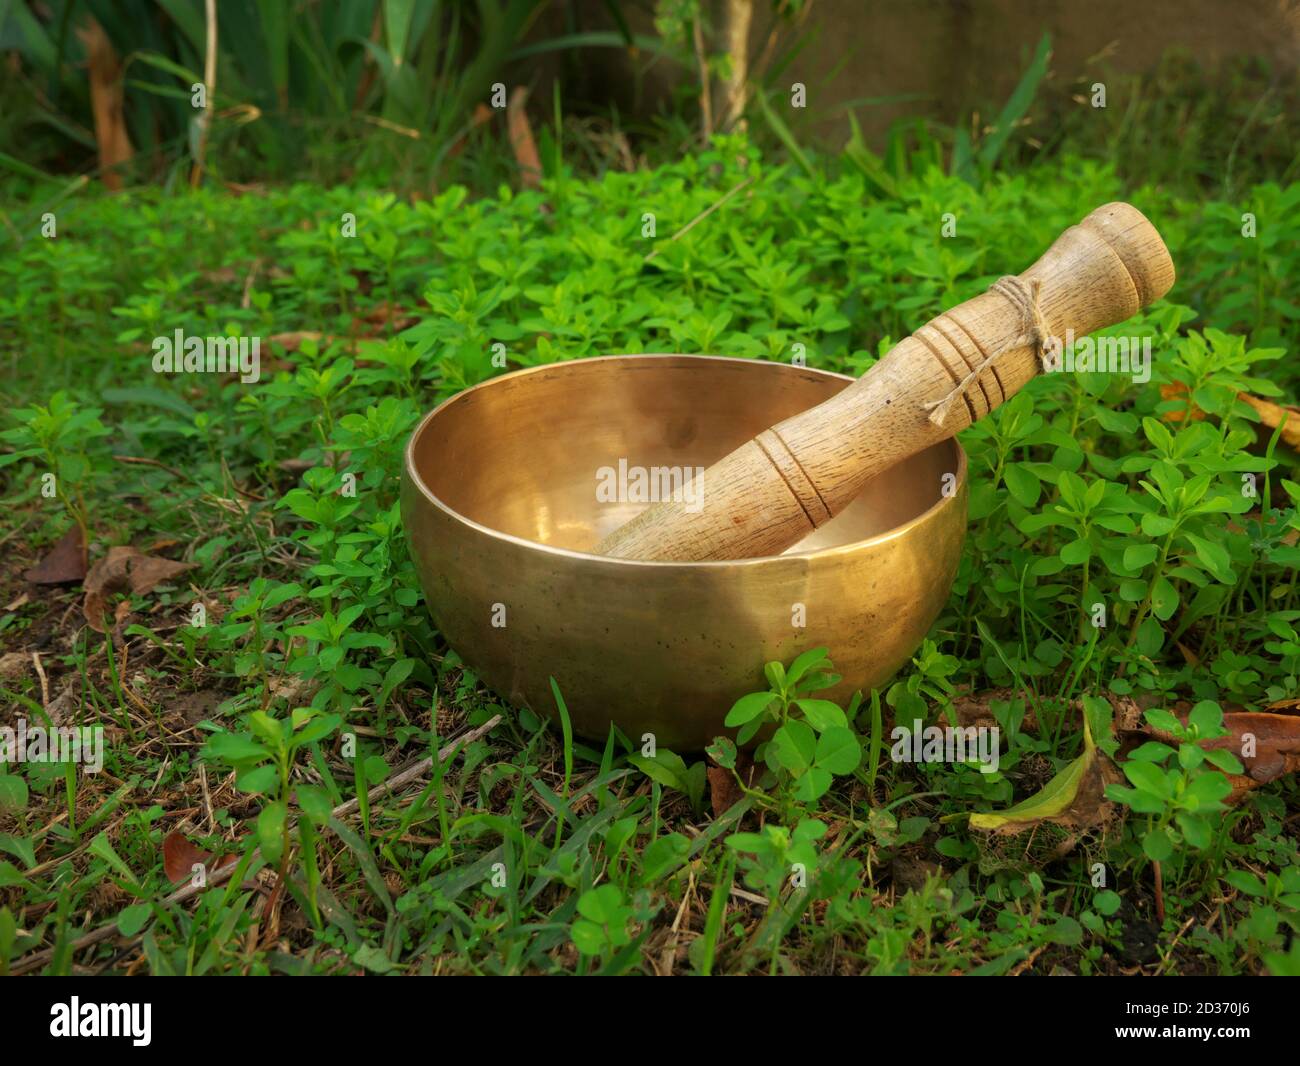 Singing bowl placed in the grass during the fall season Stock Photo